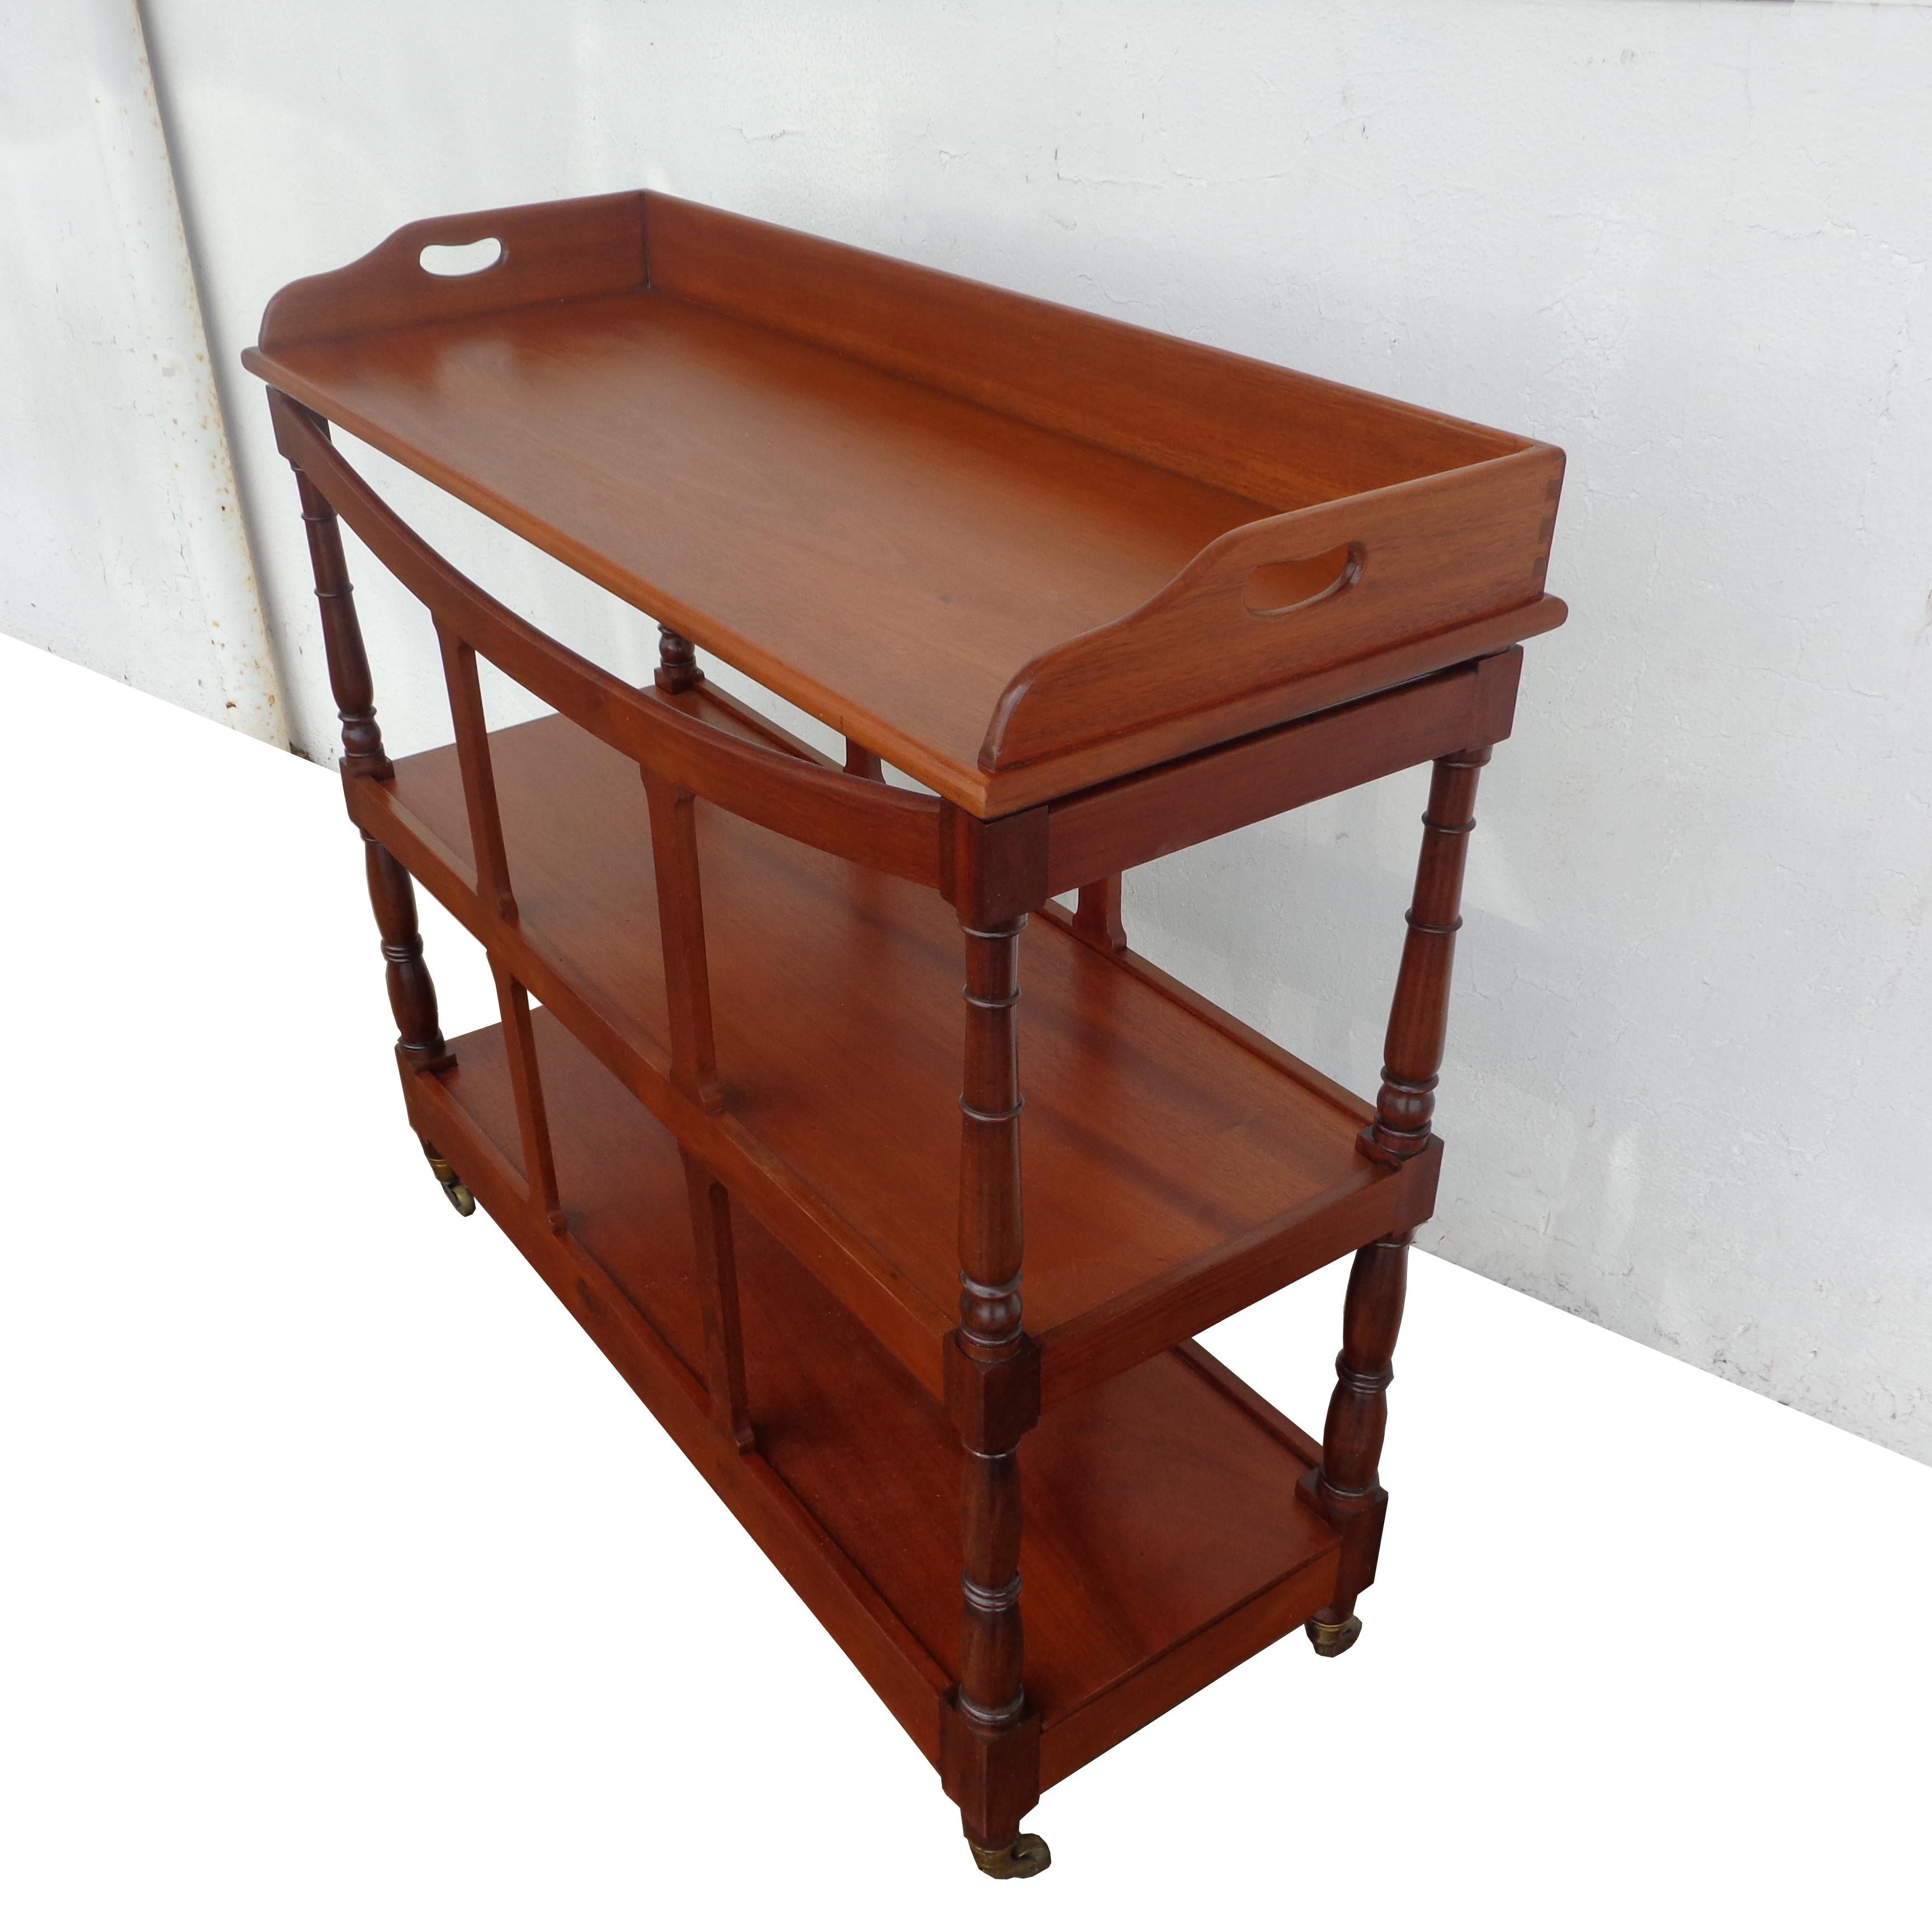 19th century Trolley Tea Cart 

Sometimes referred to as a 